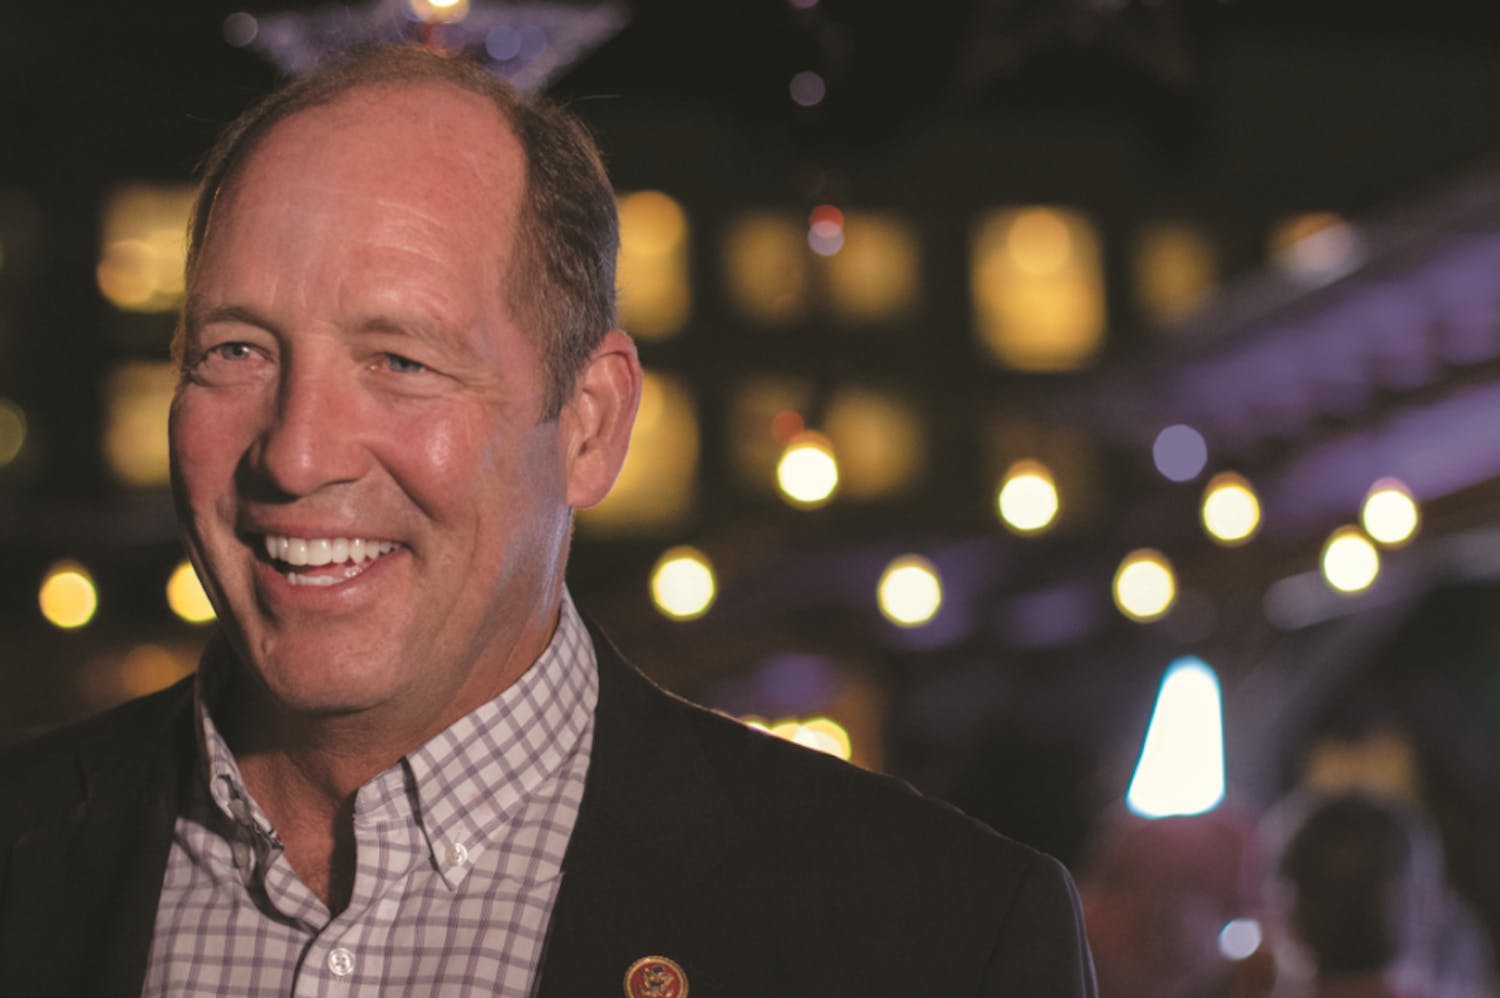 U.S. Rep. Ted Yoho smiles while he waits for the final results of Florida’s 3rd Congressional District election. “I want to see the final results, but I feel good,” Yoho said. 